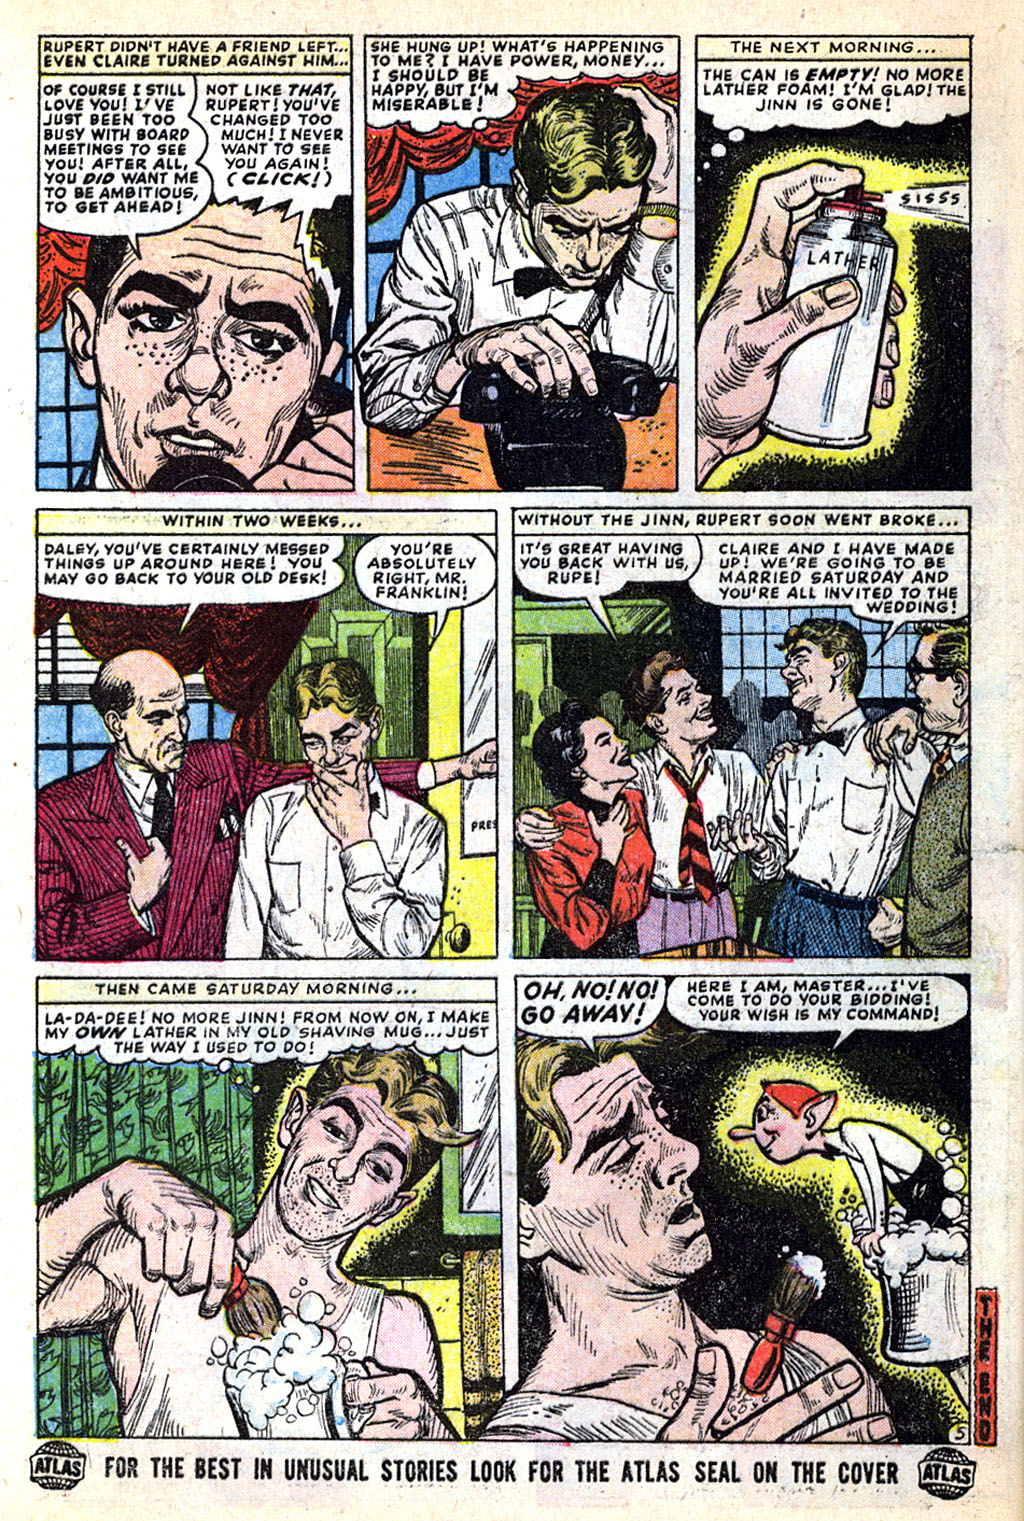 Marvel Tales (1949) 137 Page 31